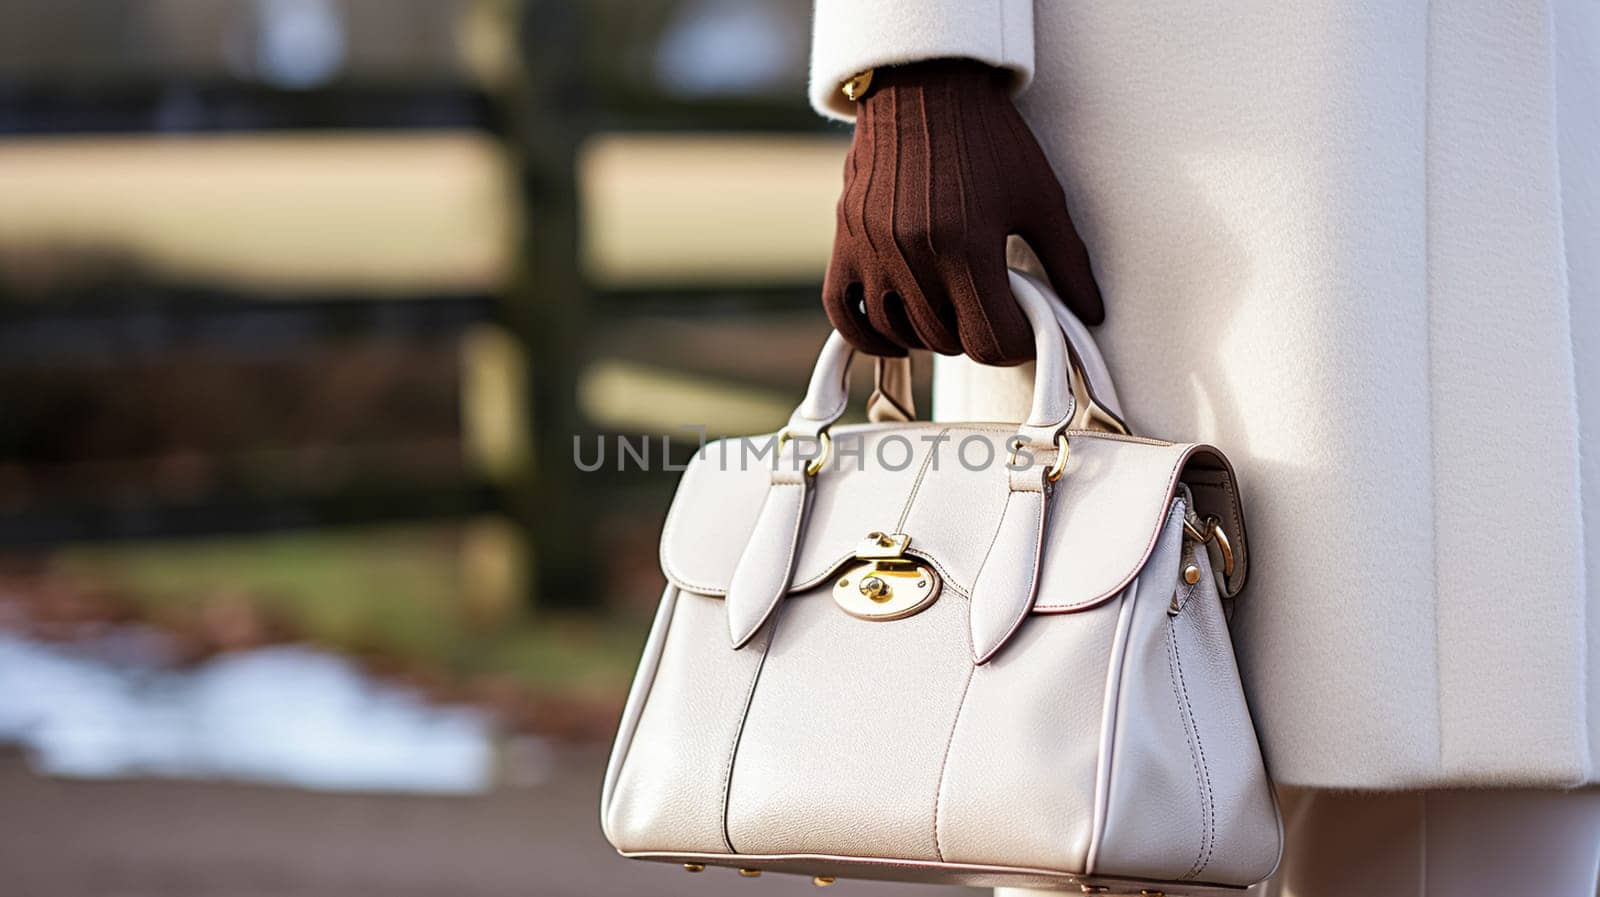 Fashion, accessory and style, autumn winter womenswear clothing collection, woman wearing elegant clothes, gloves and handbag, English countryside look by Anneleven